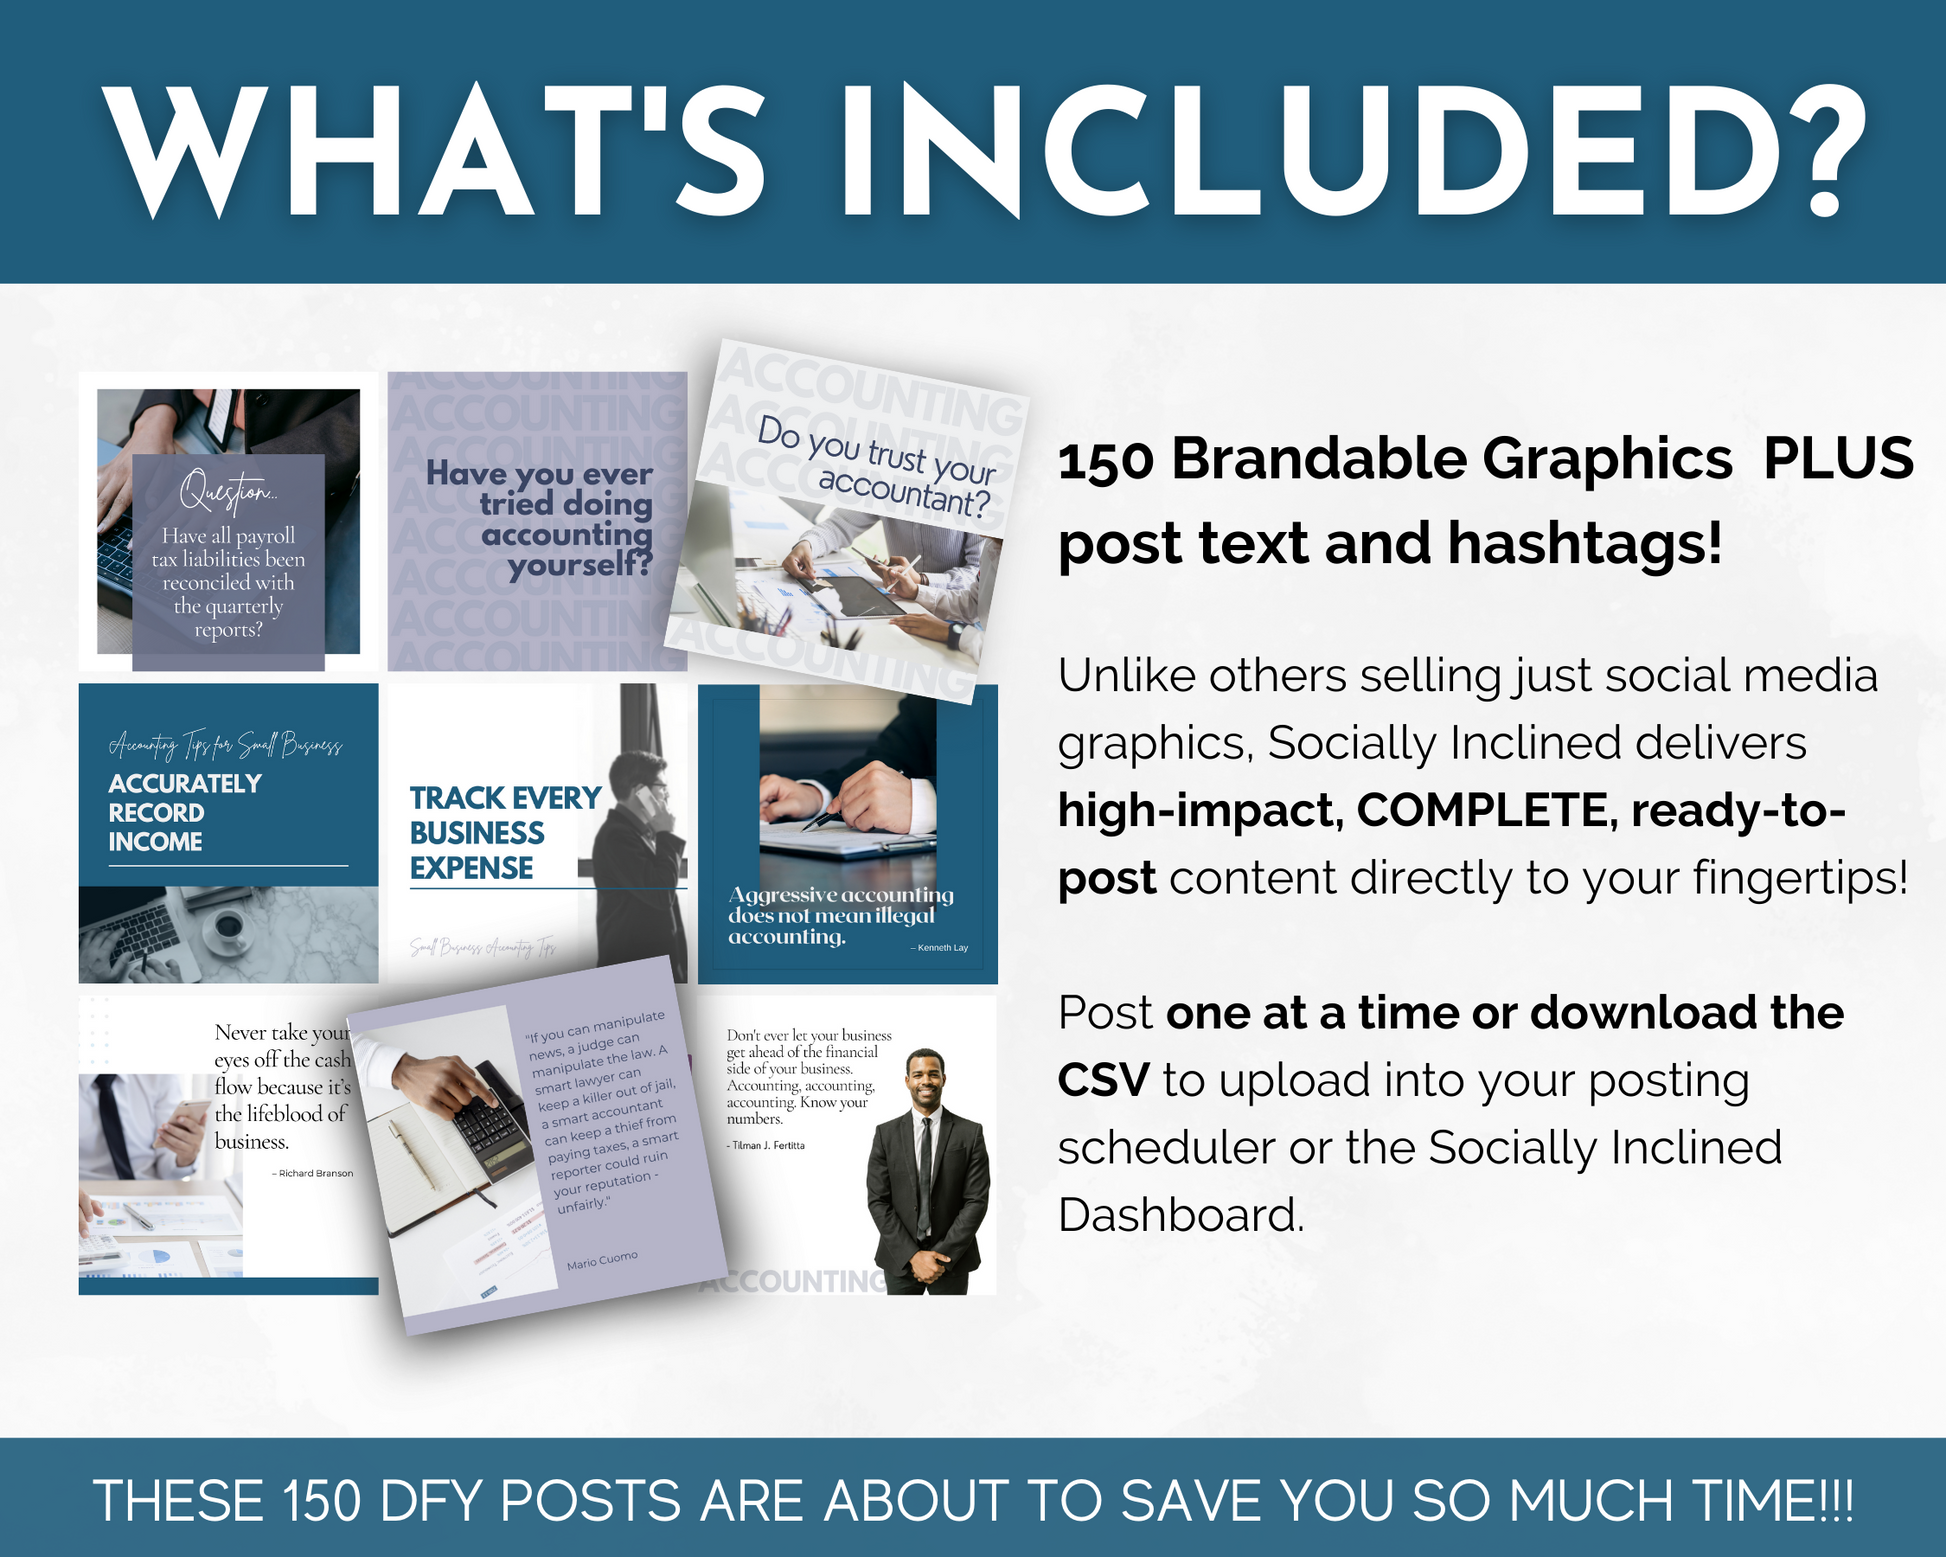 What's included in the Accounting Social Media Post Bundle with Canva Templates from Socially Inclined?